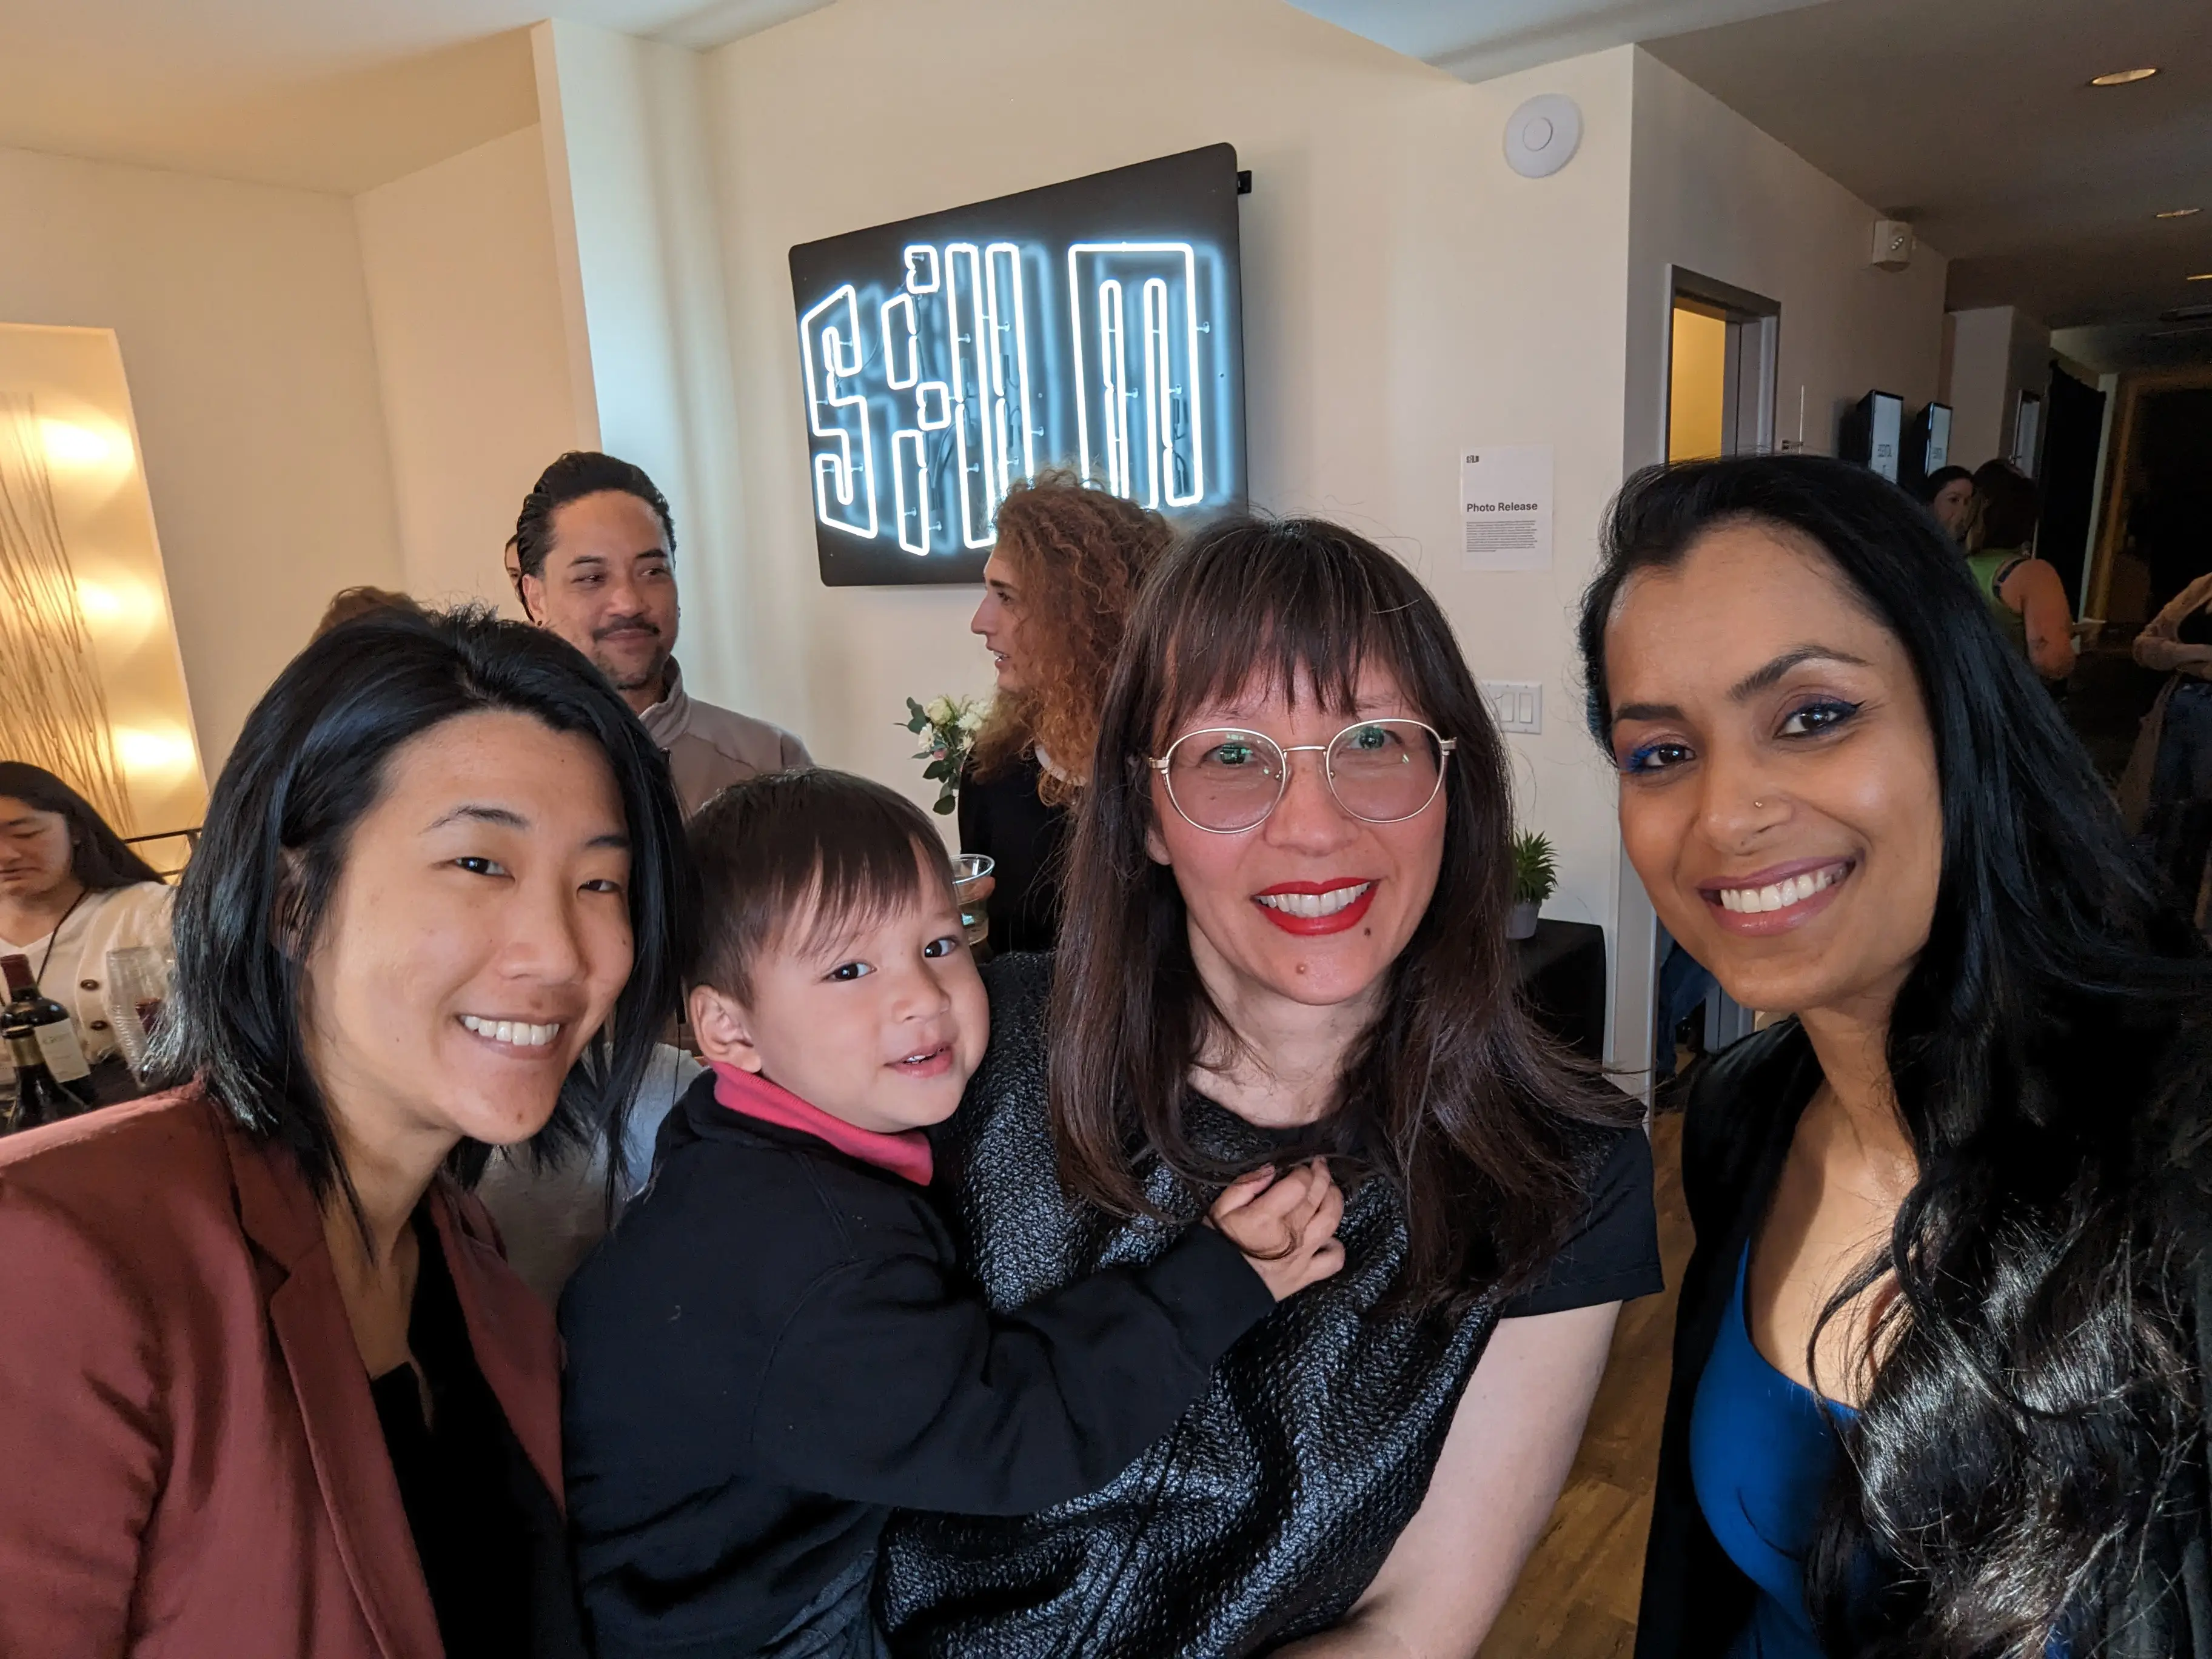 Three BGDM members and a toddler smile in front of the SFFILM neon sign. From left to right, Asian Betsy Tsai, Asian Ursula Liang and her son, and another woman of color.